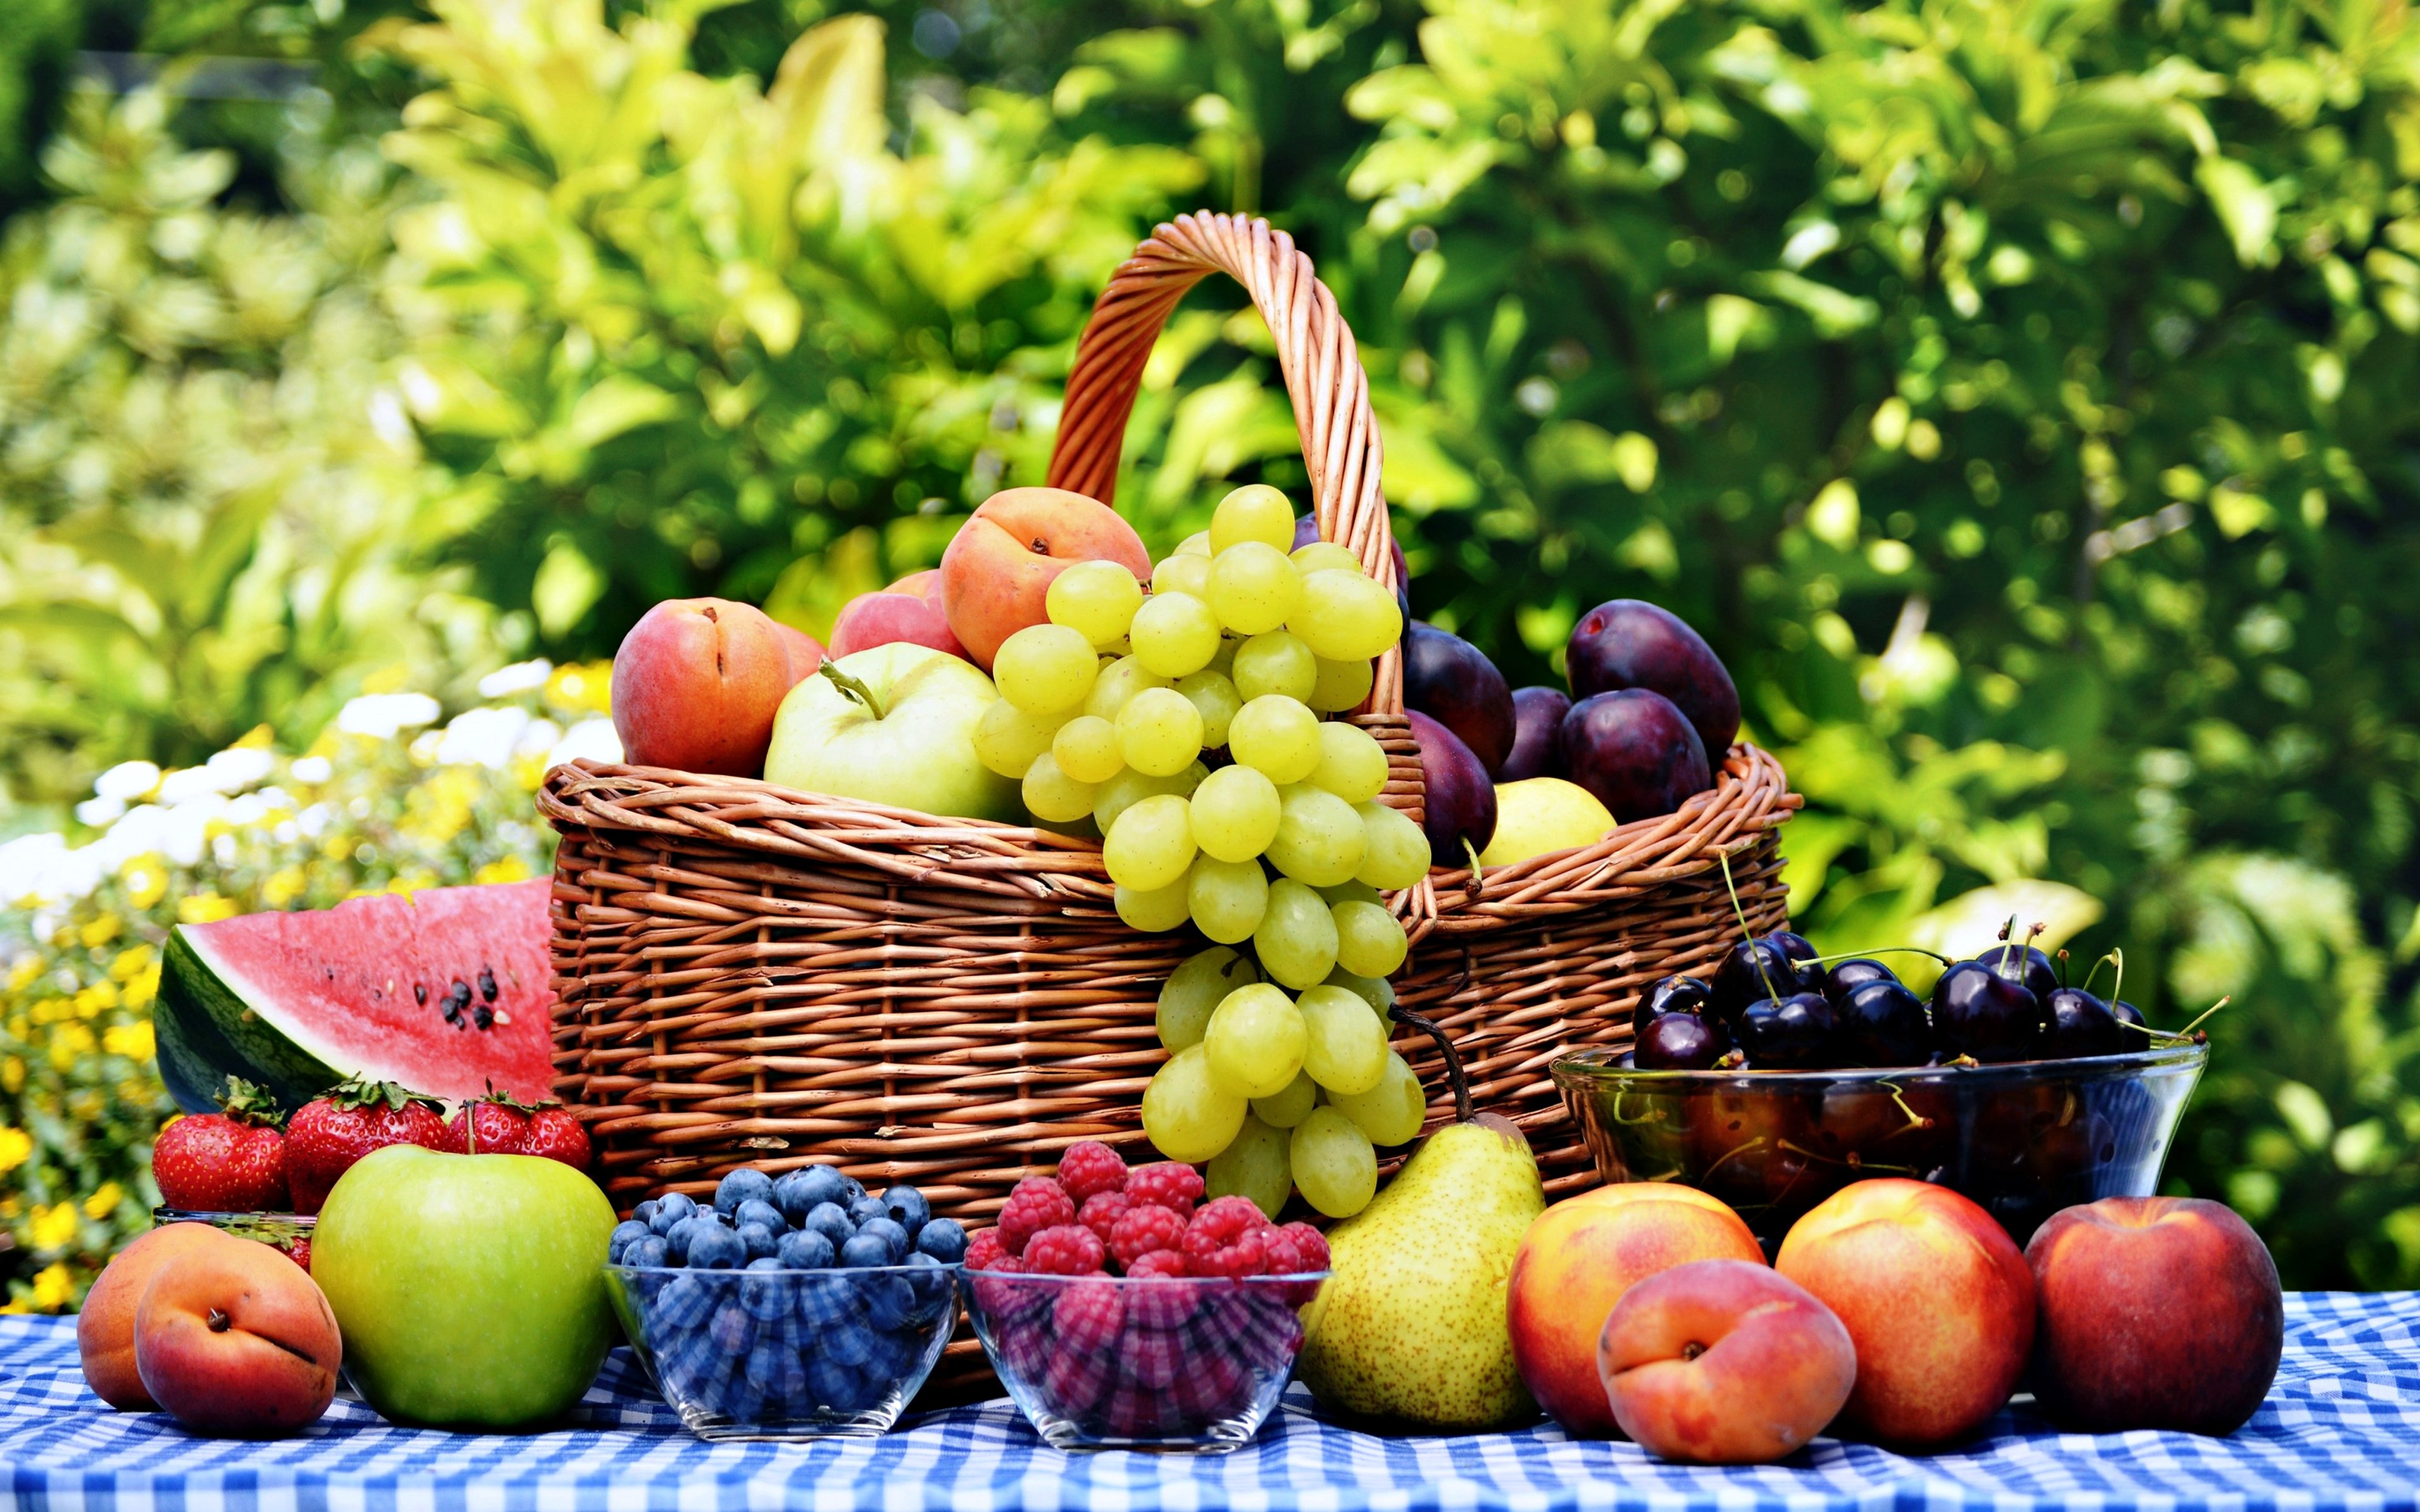 fruits, Basket, Grape, Strawberry, Apple, Watermelon, Blueberry, Cherry, Nature, Food, Delicious, Sweet, Summer, Table Wallpaper